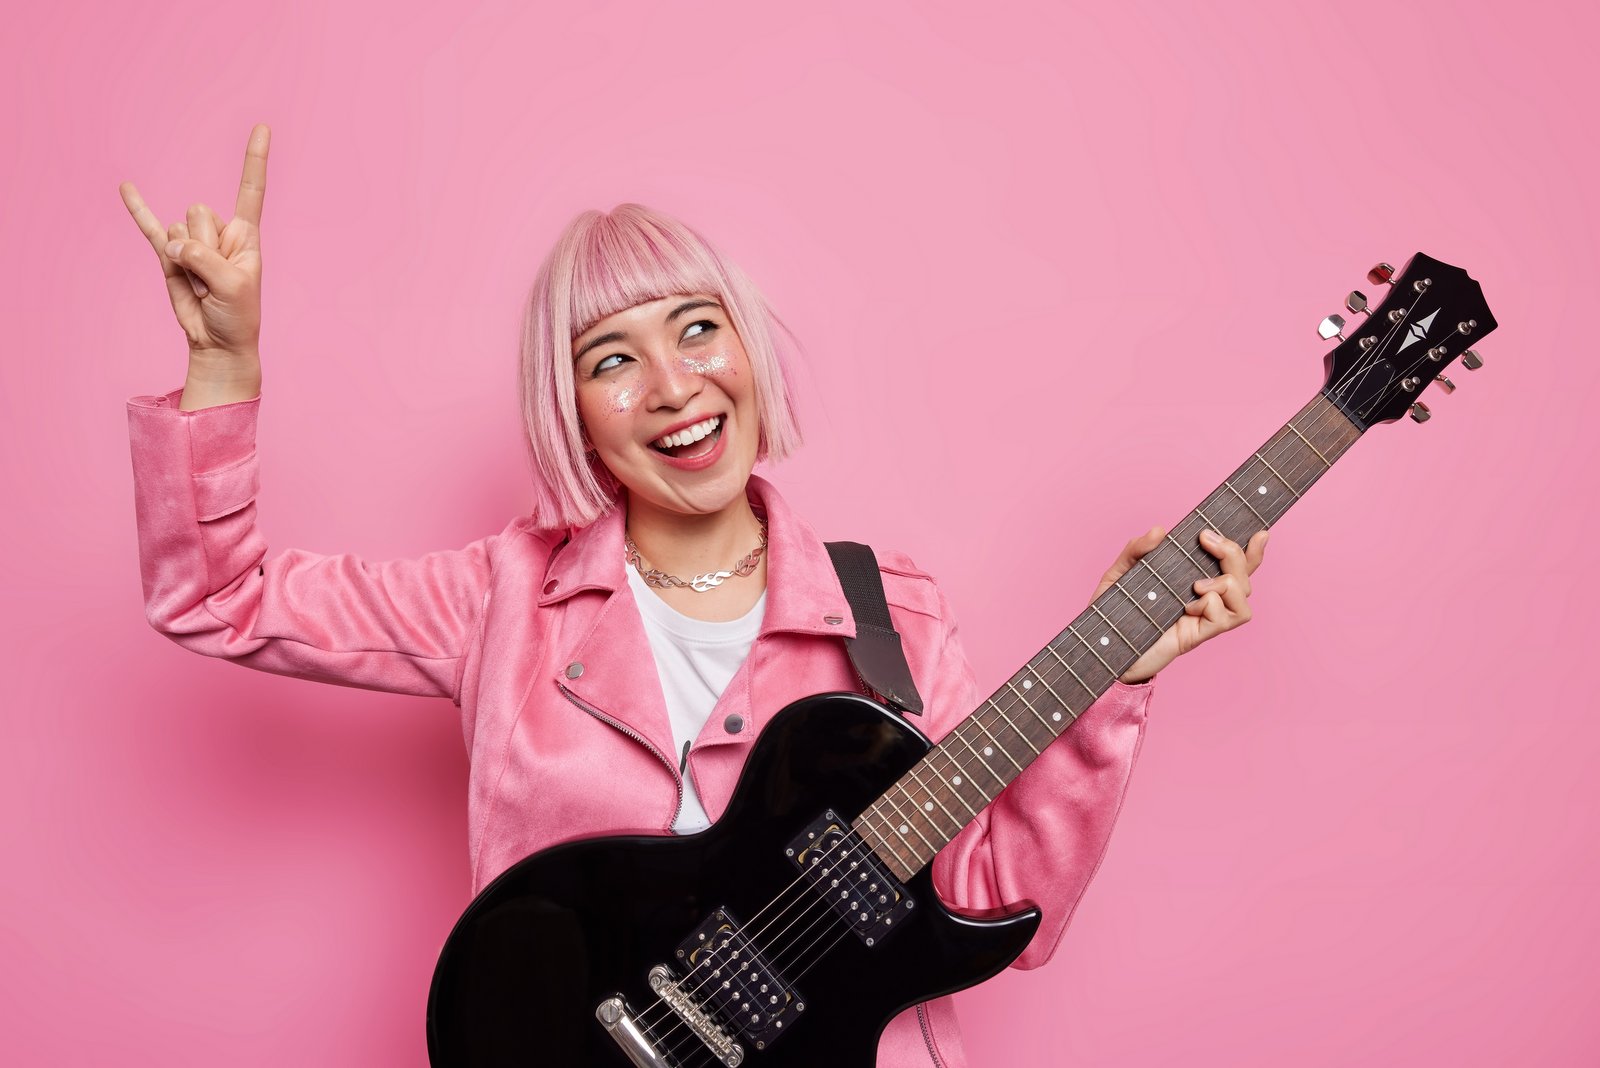 Woman rockstar with guitar and pink hair